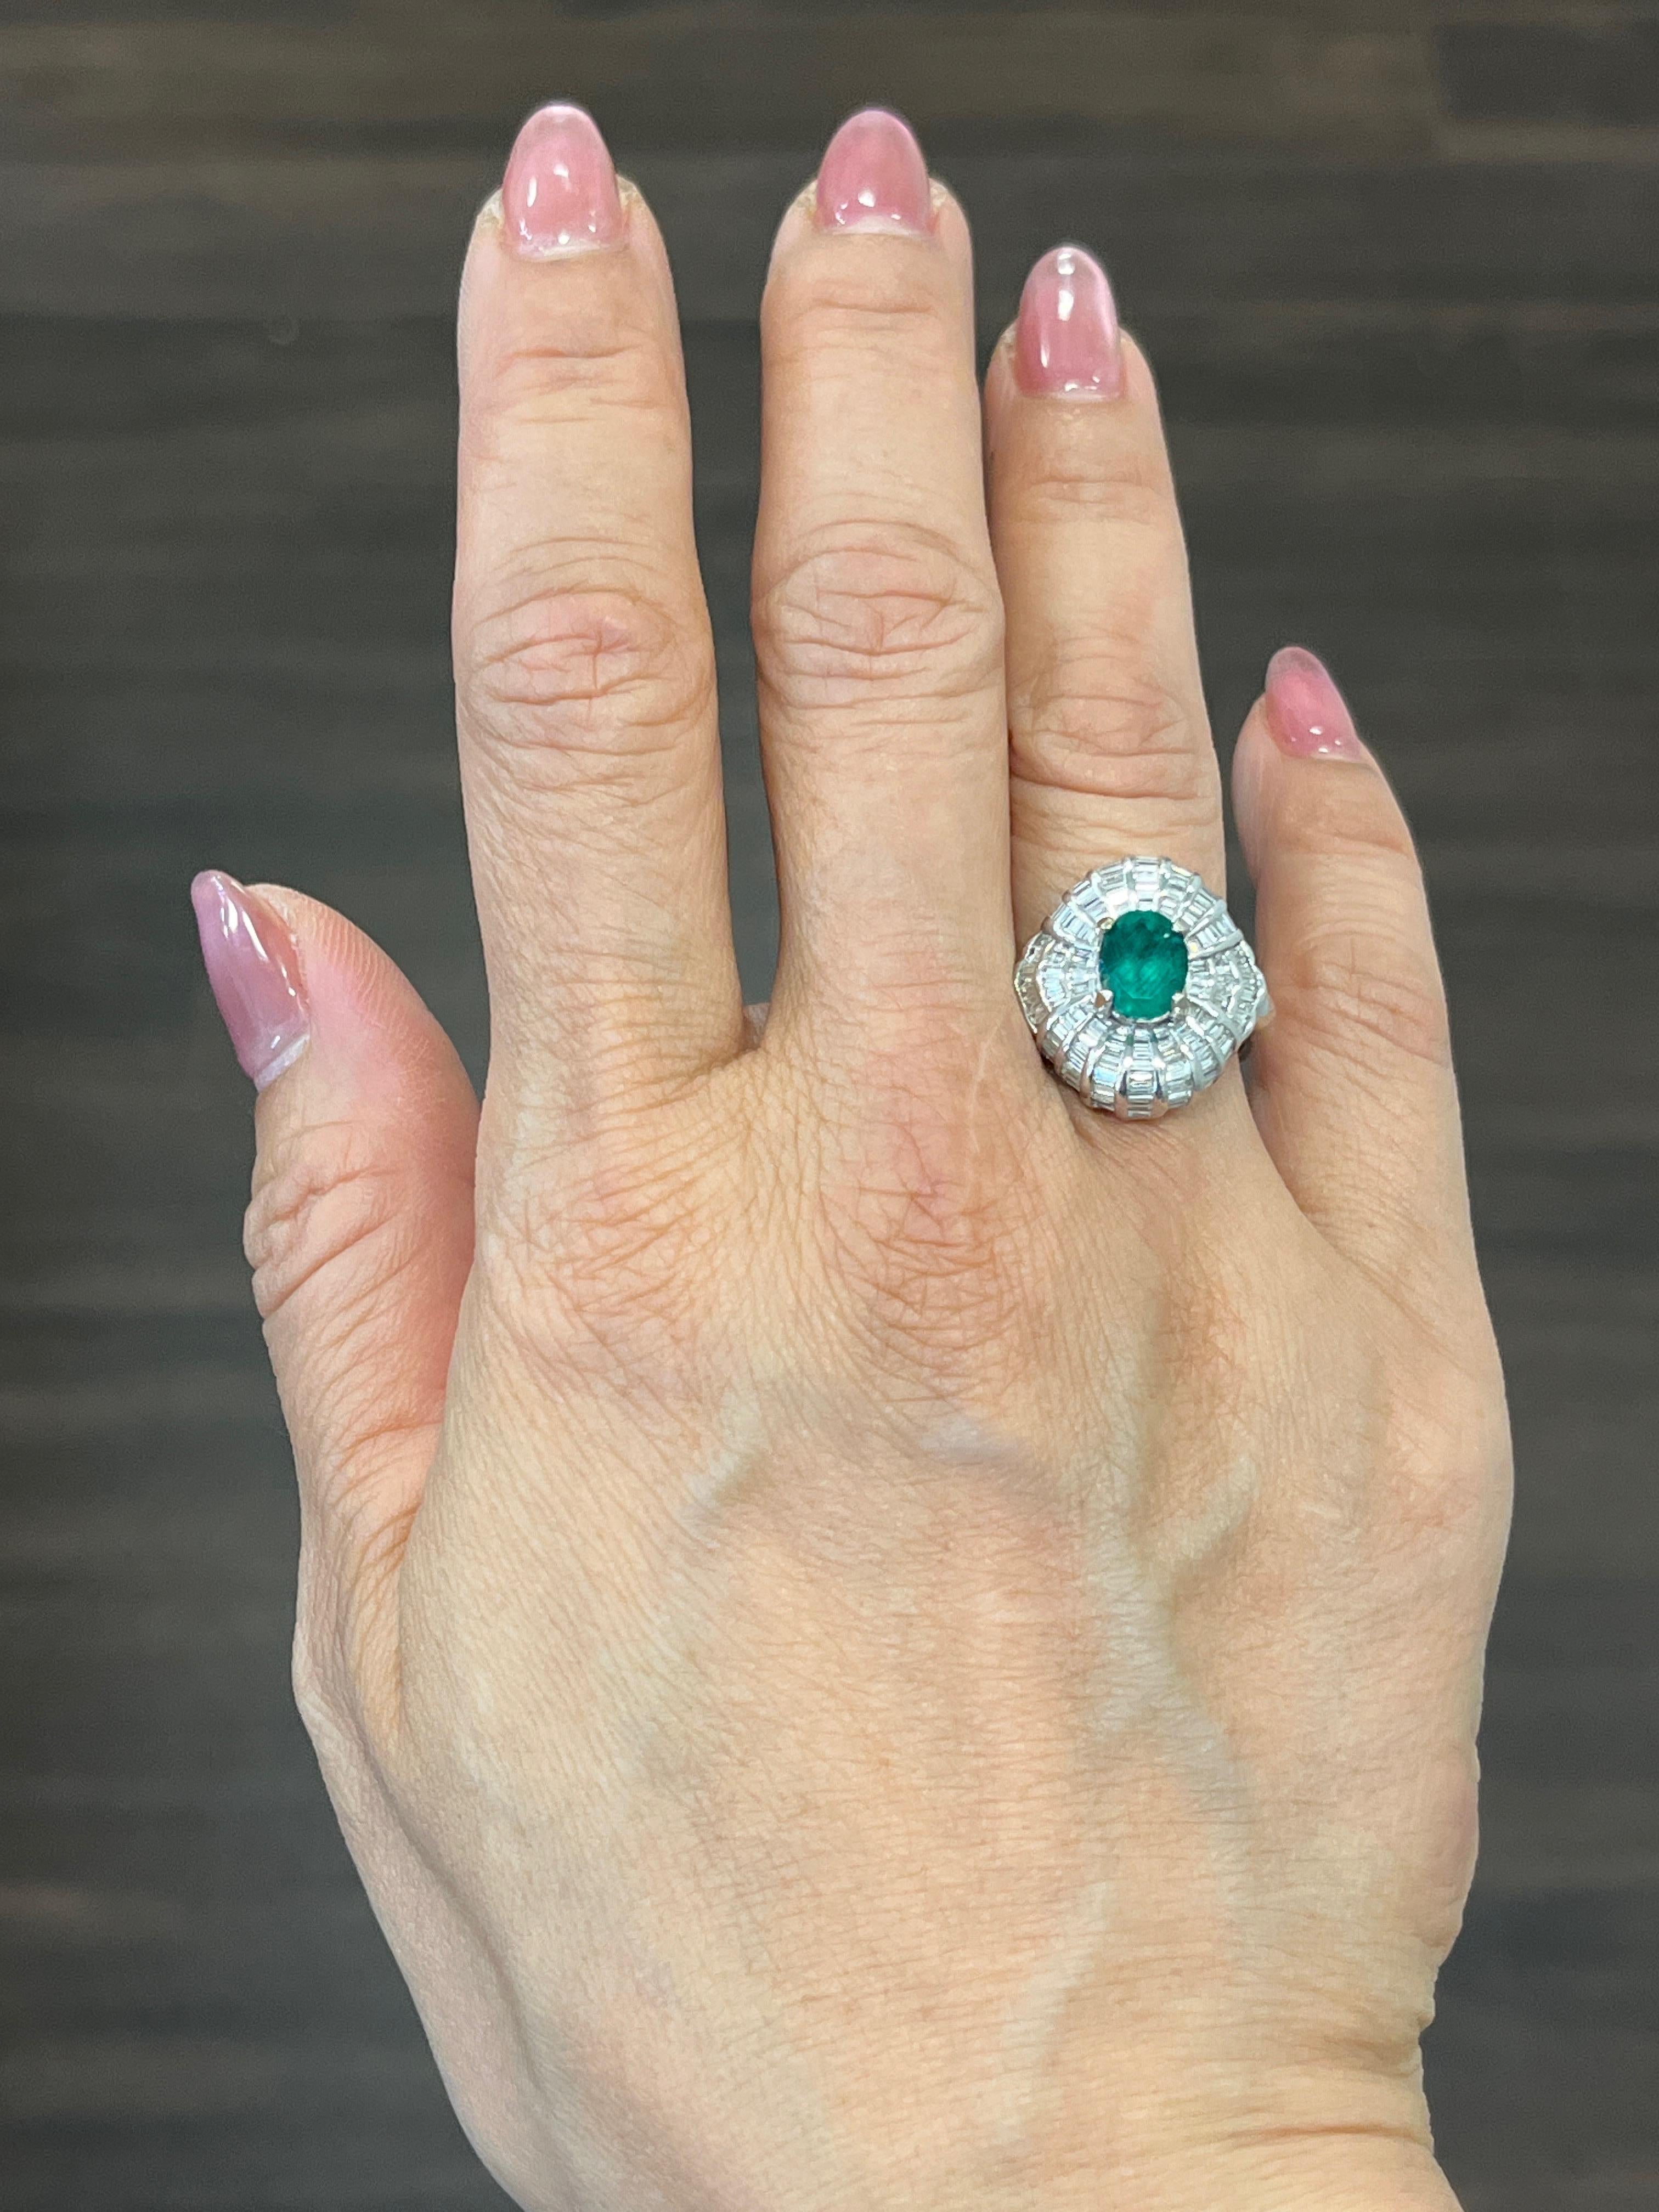 Elevate your jewelry collection with this stunning 18k white gold cocktail ring featuring a natural 1.37 ct oval-shaped emerald and sparkling diamond accents. The gemstone is set in a beautifully designed white gold band, making it an exquisite